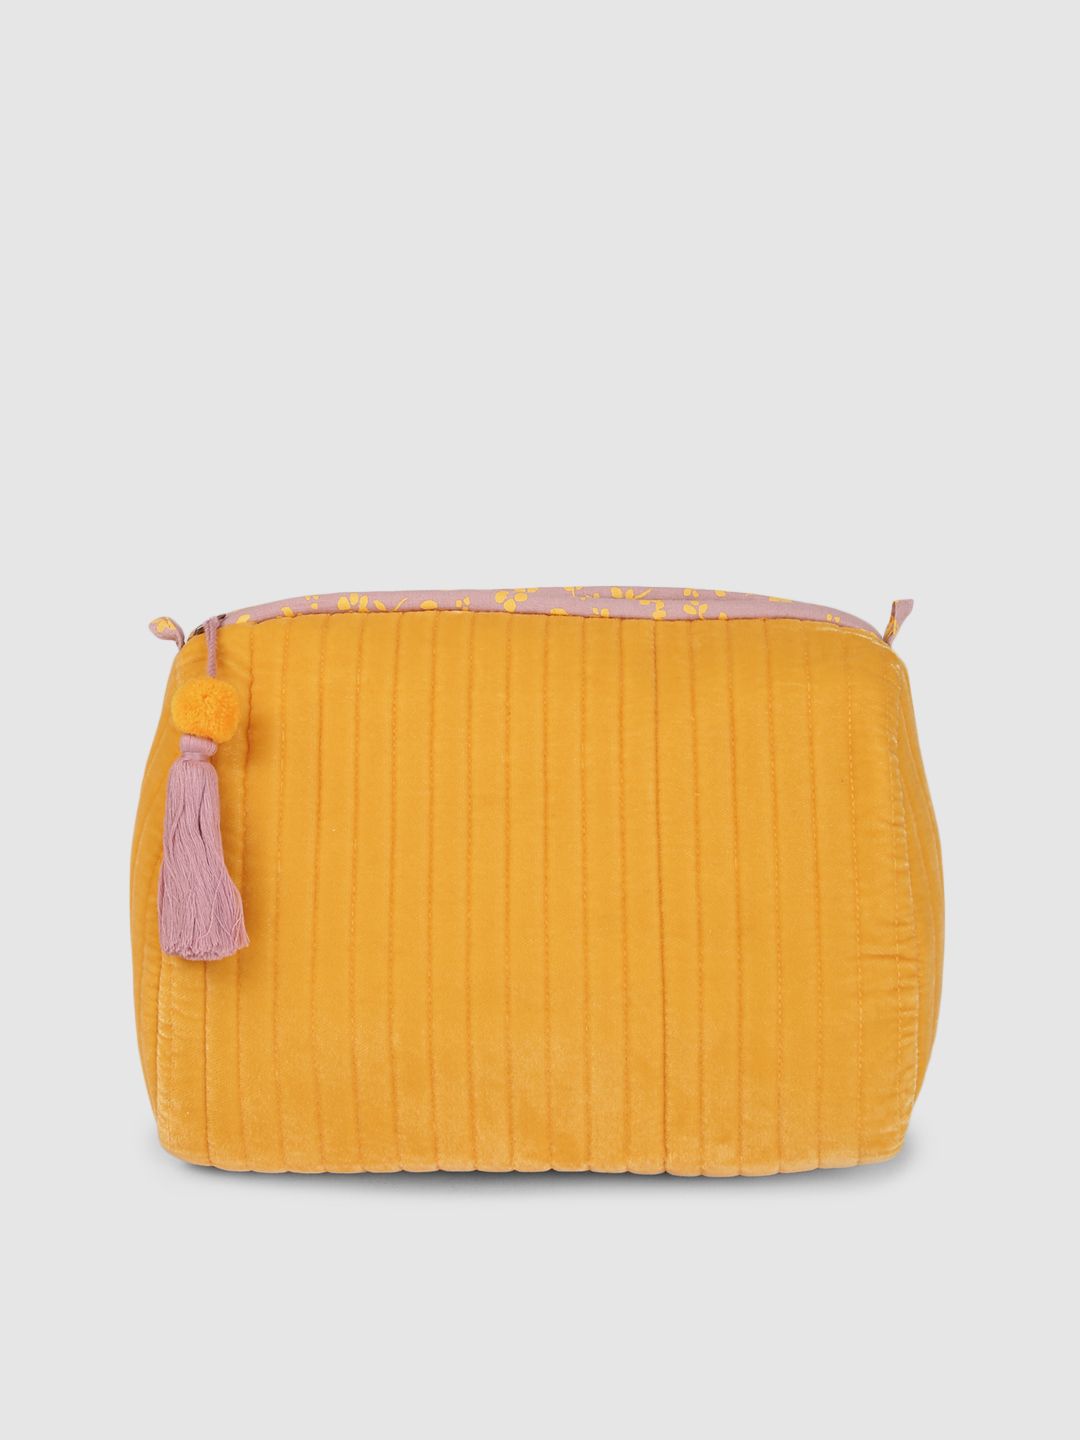 Accessorize Yellow Self-Striped Makeup Pouch Price in India